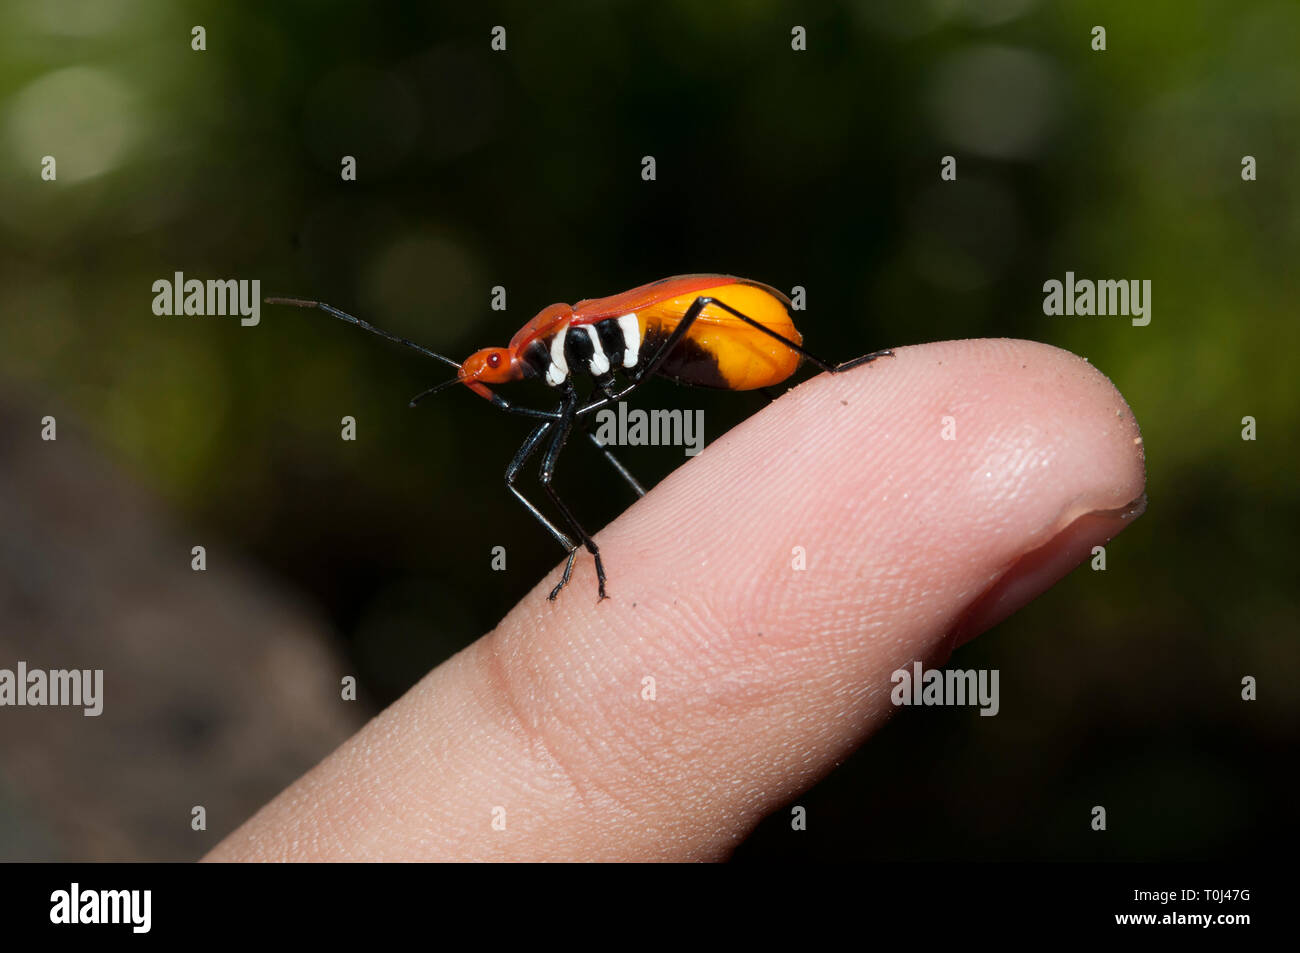 True Bug, Dindymus sp, female swollen with eggs on finger, Klungkung, Bali, Indonesia Stock Photo